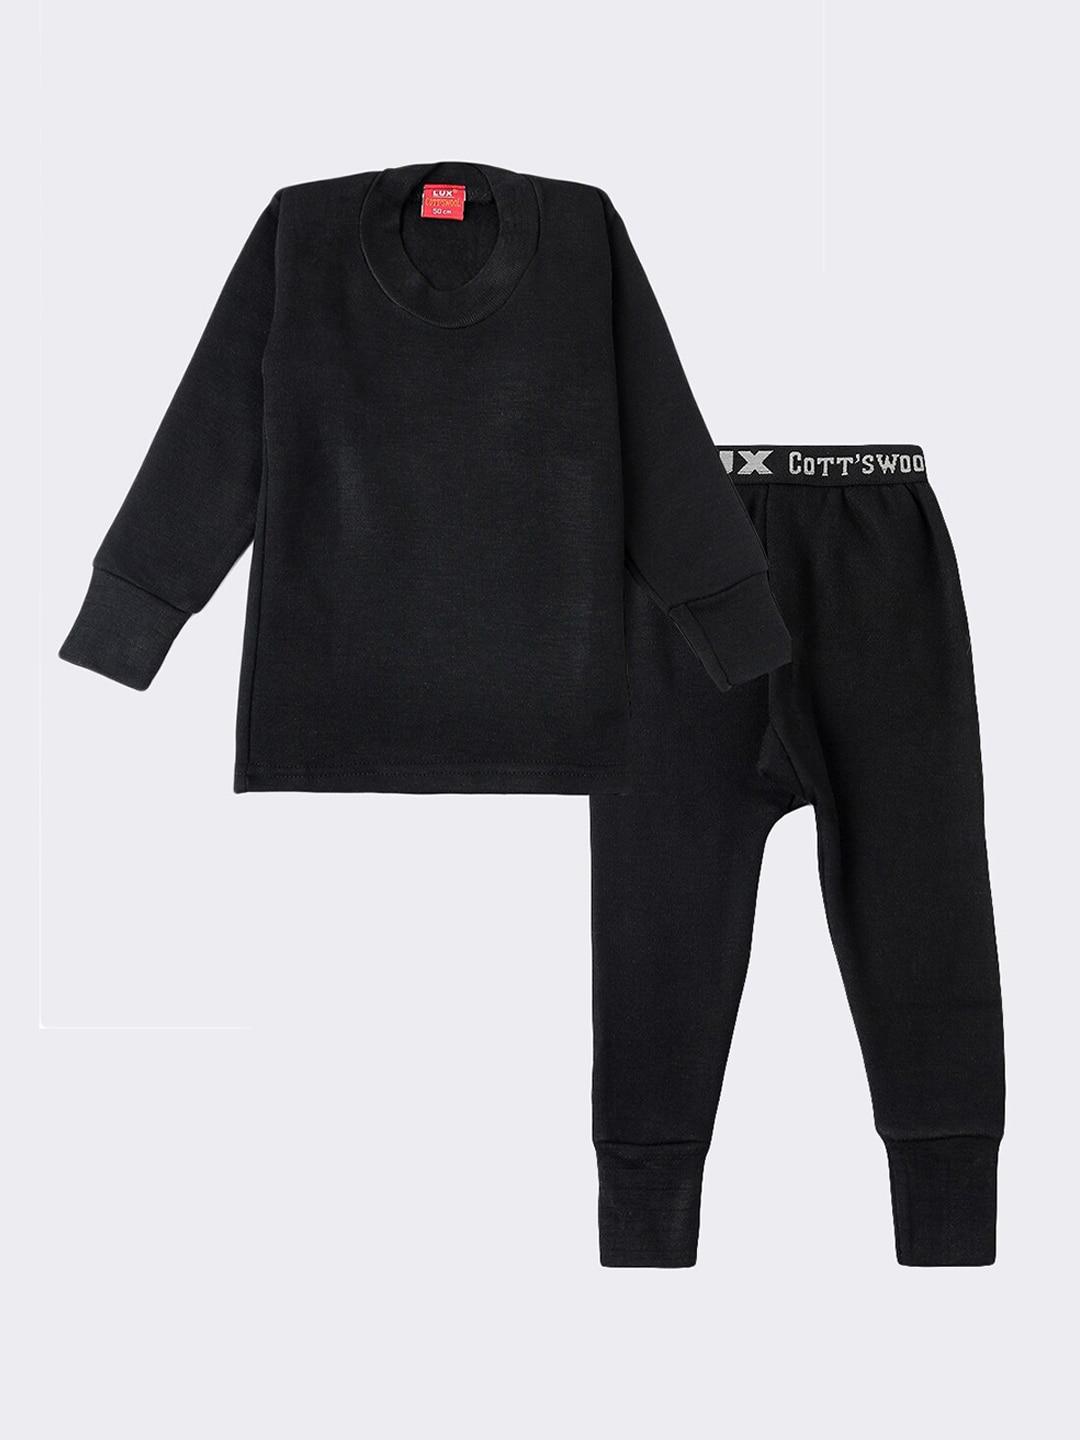 Lux Cottswool Boys Black Solid Cotton Thermal Set